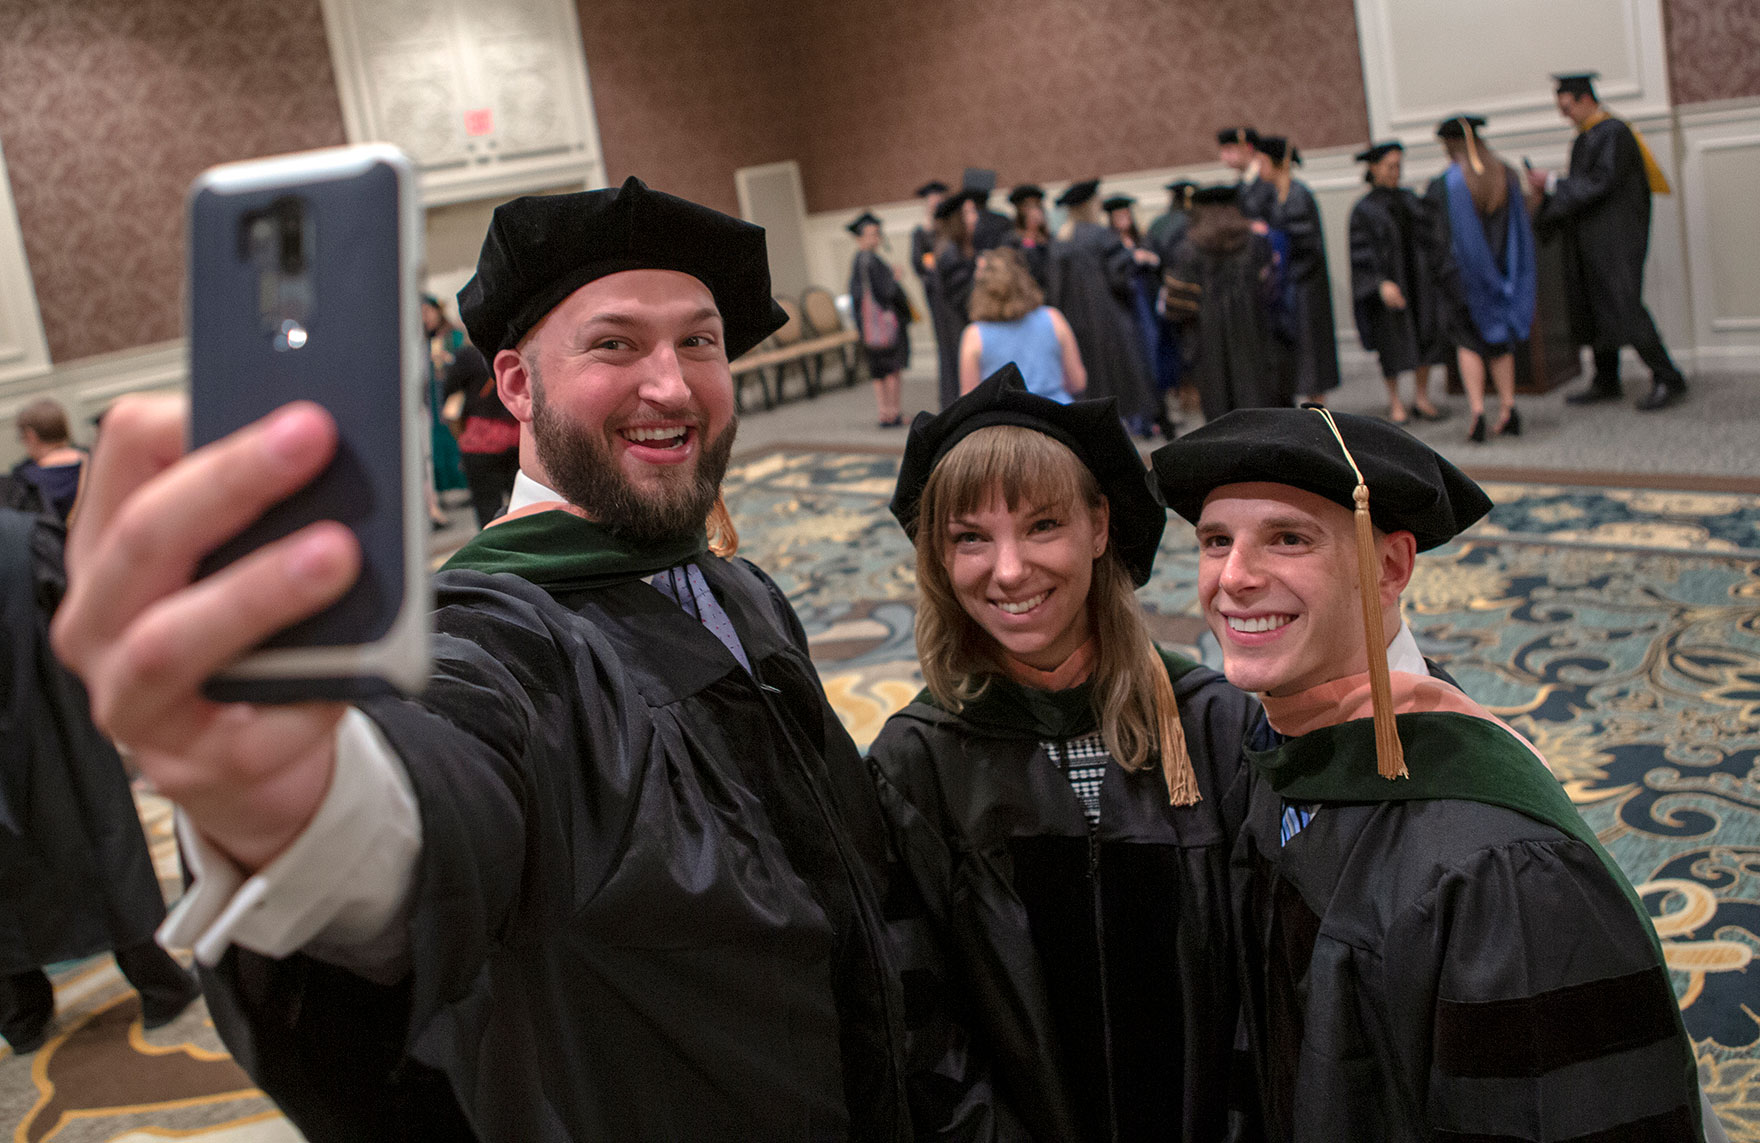 Penn State College of Medicine's MD-MPH program graduated three students in May 2019. They are pictured taking a selfie at Commencement.